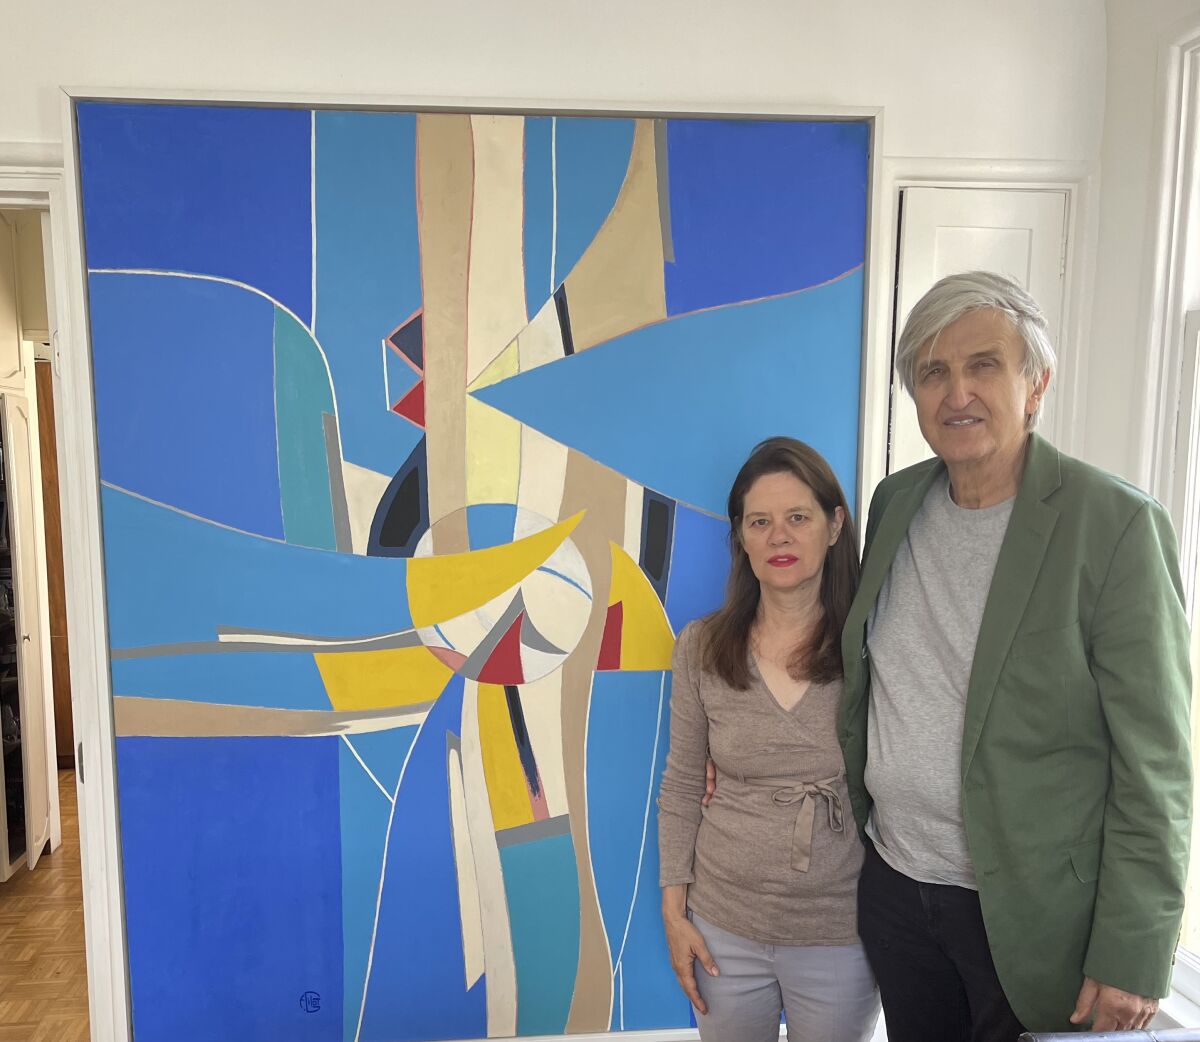 Francoise Gilot's "Streams of Gravitation" (2005) is pictured with her daughter Aurelia Engel and Engel's husband, Colas.